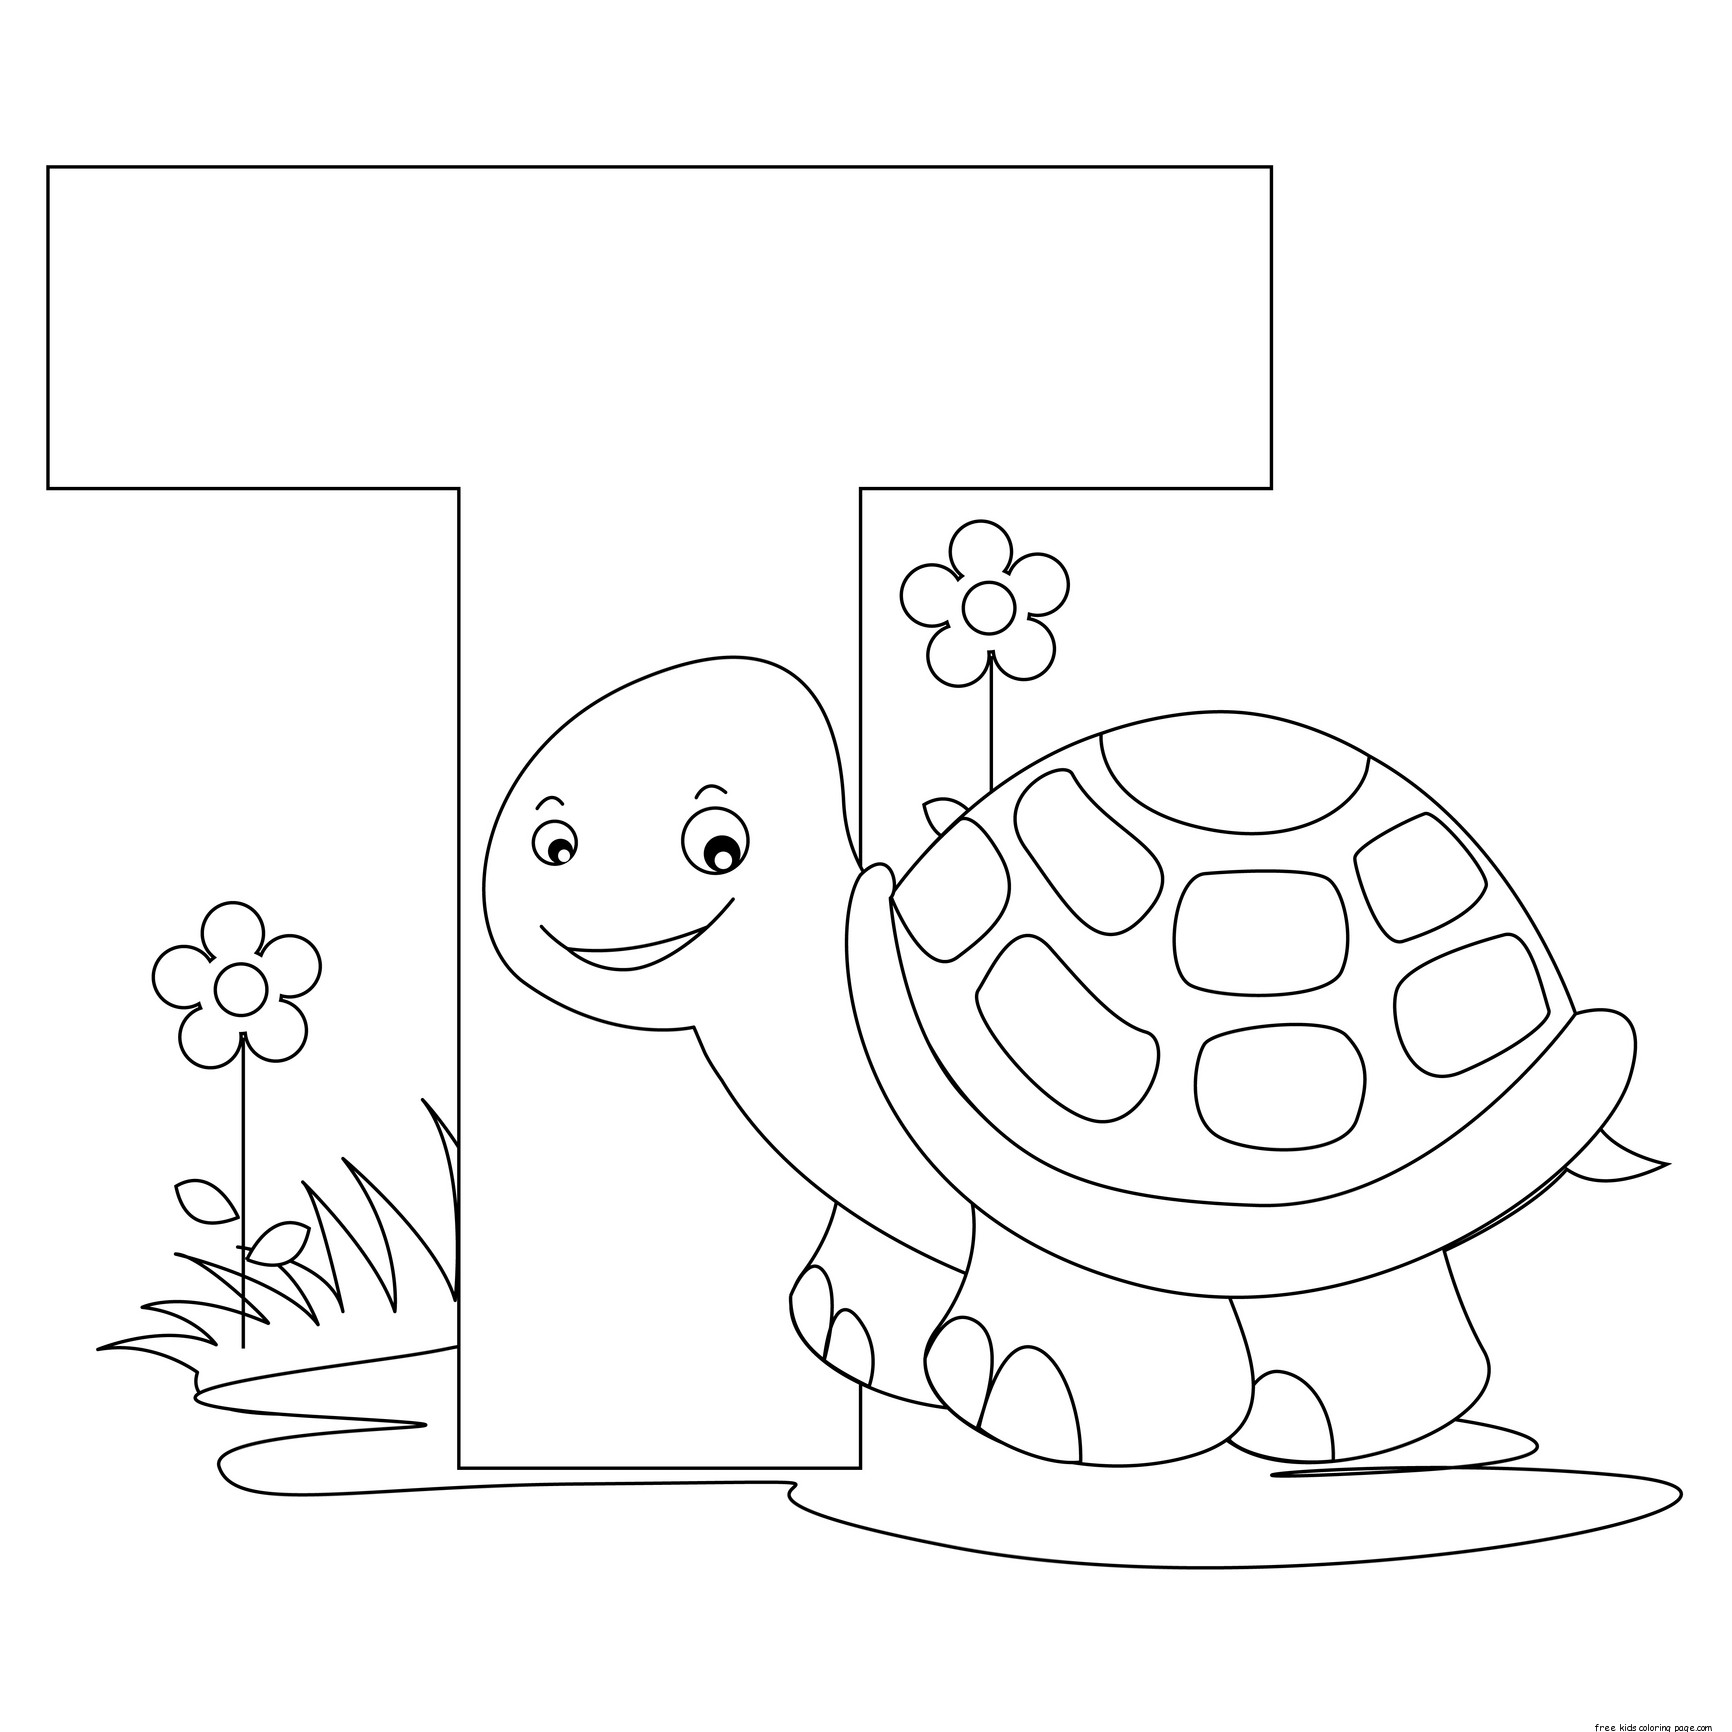 Printable Animal Alphabet Letter T is for Turtle